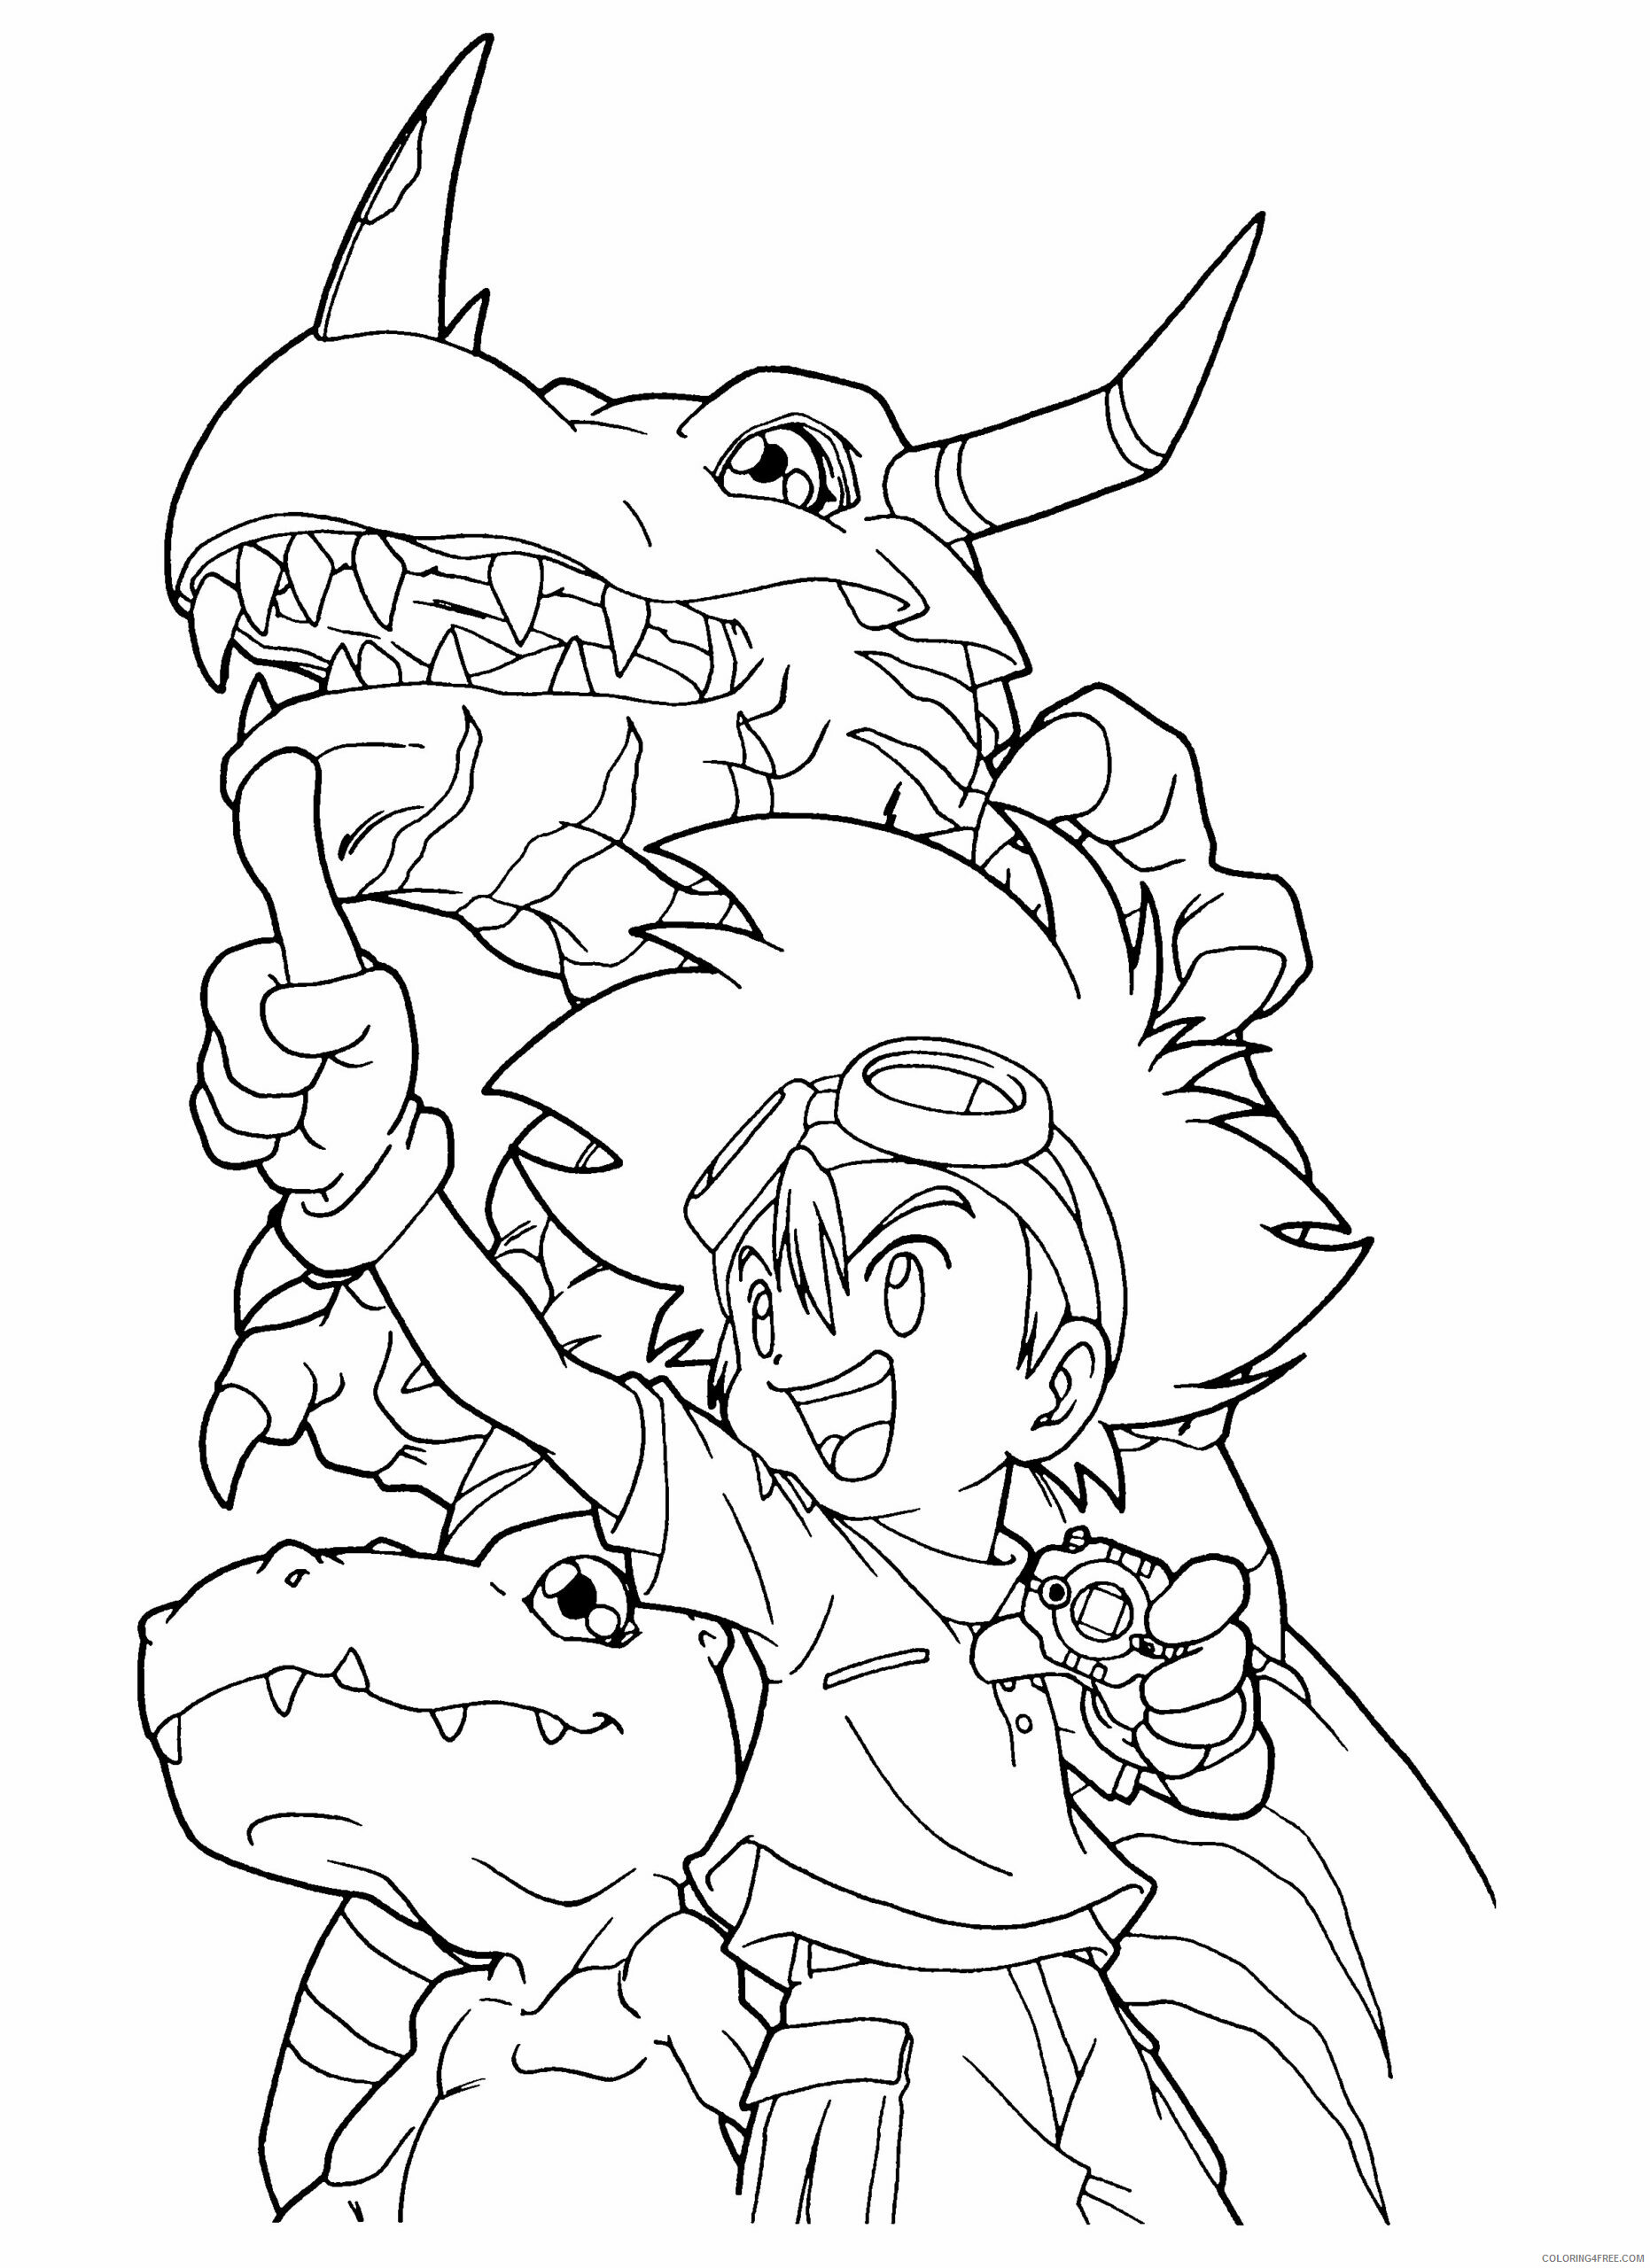 Digimon Printable Coloring Pages Anime digimon 101 2021 0208 Coloring4free